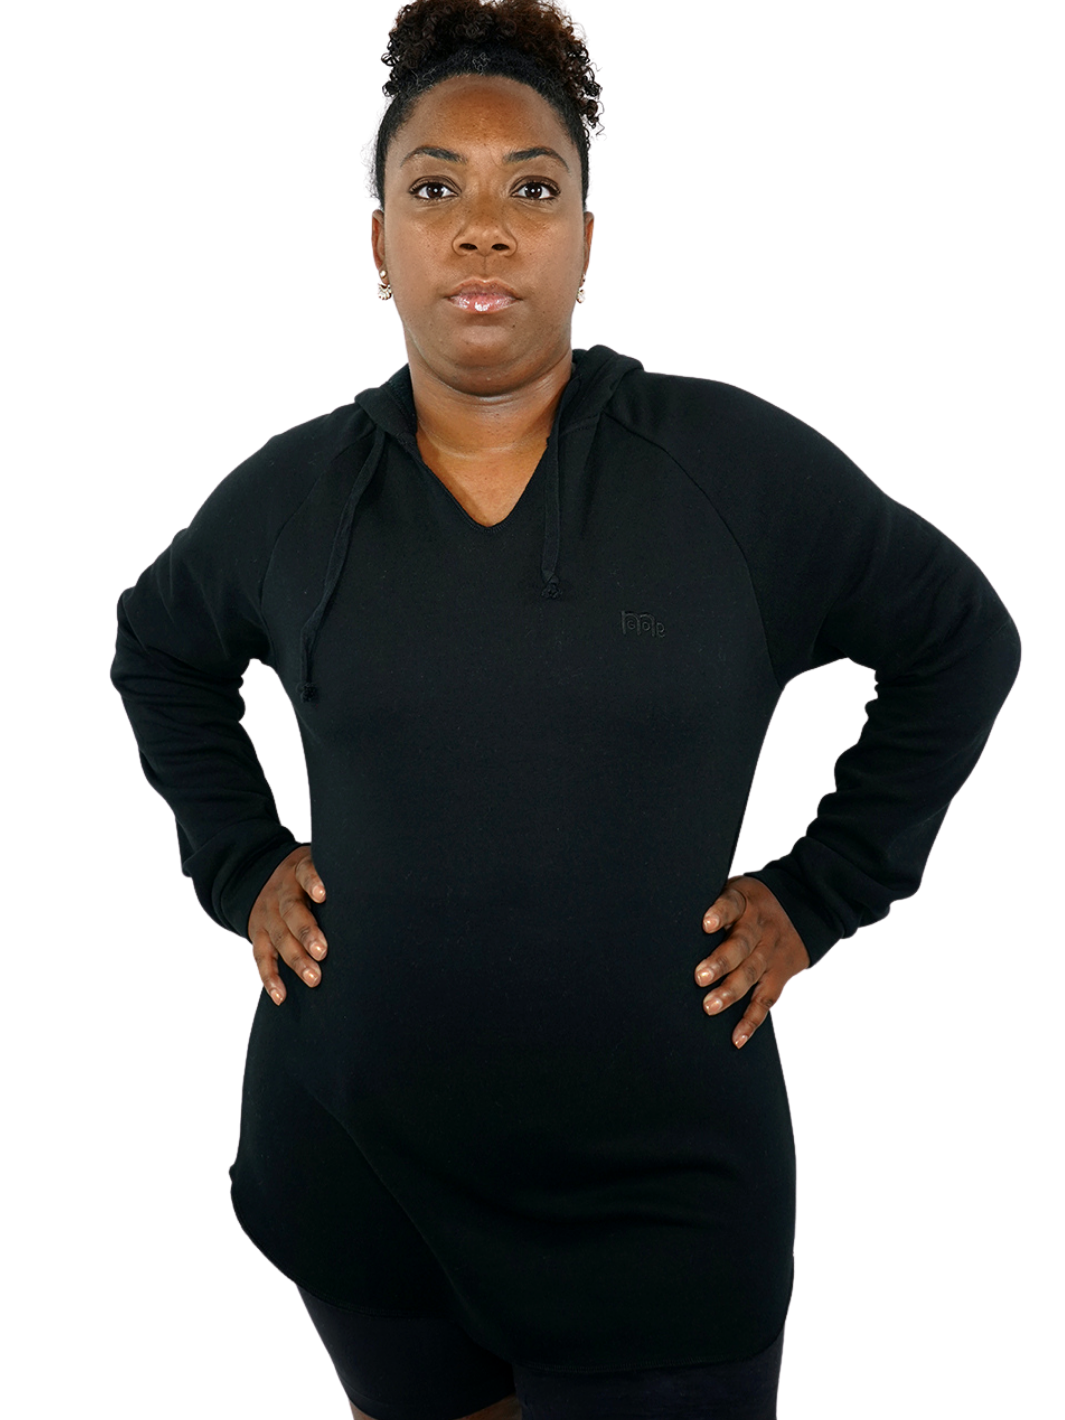 Women's Black Tunic Top, can also be worn as a dress, offers a stylish design and superior comfort while representing GOD in you with logo at left chest. Order Yours Today!